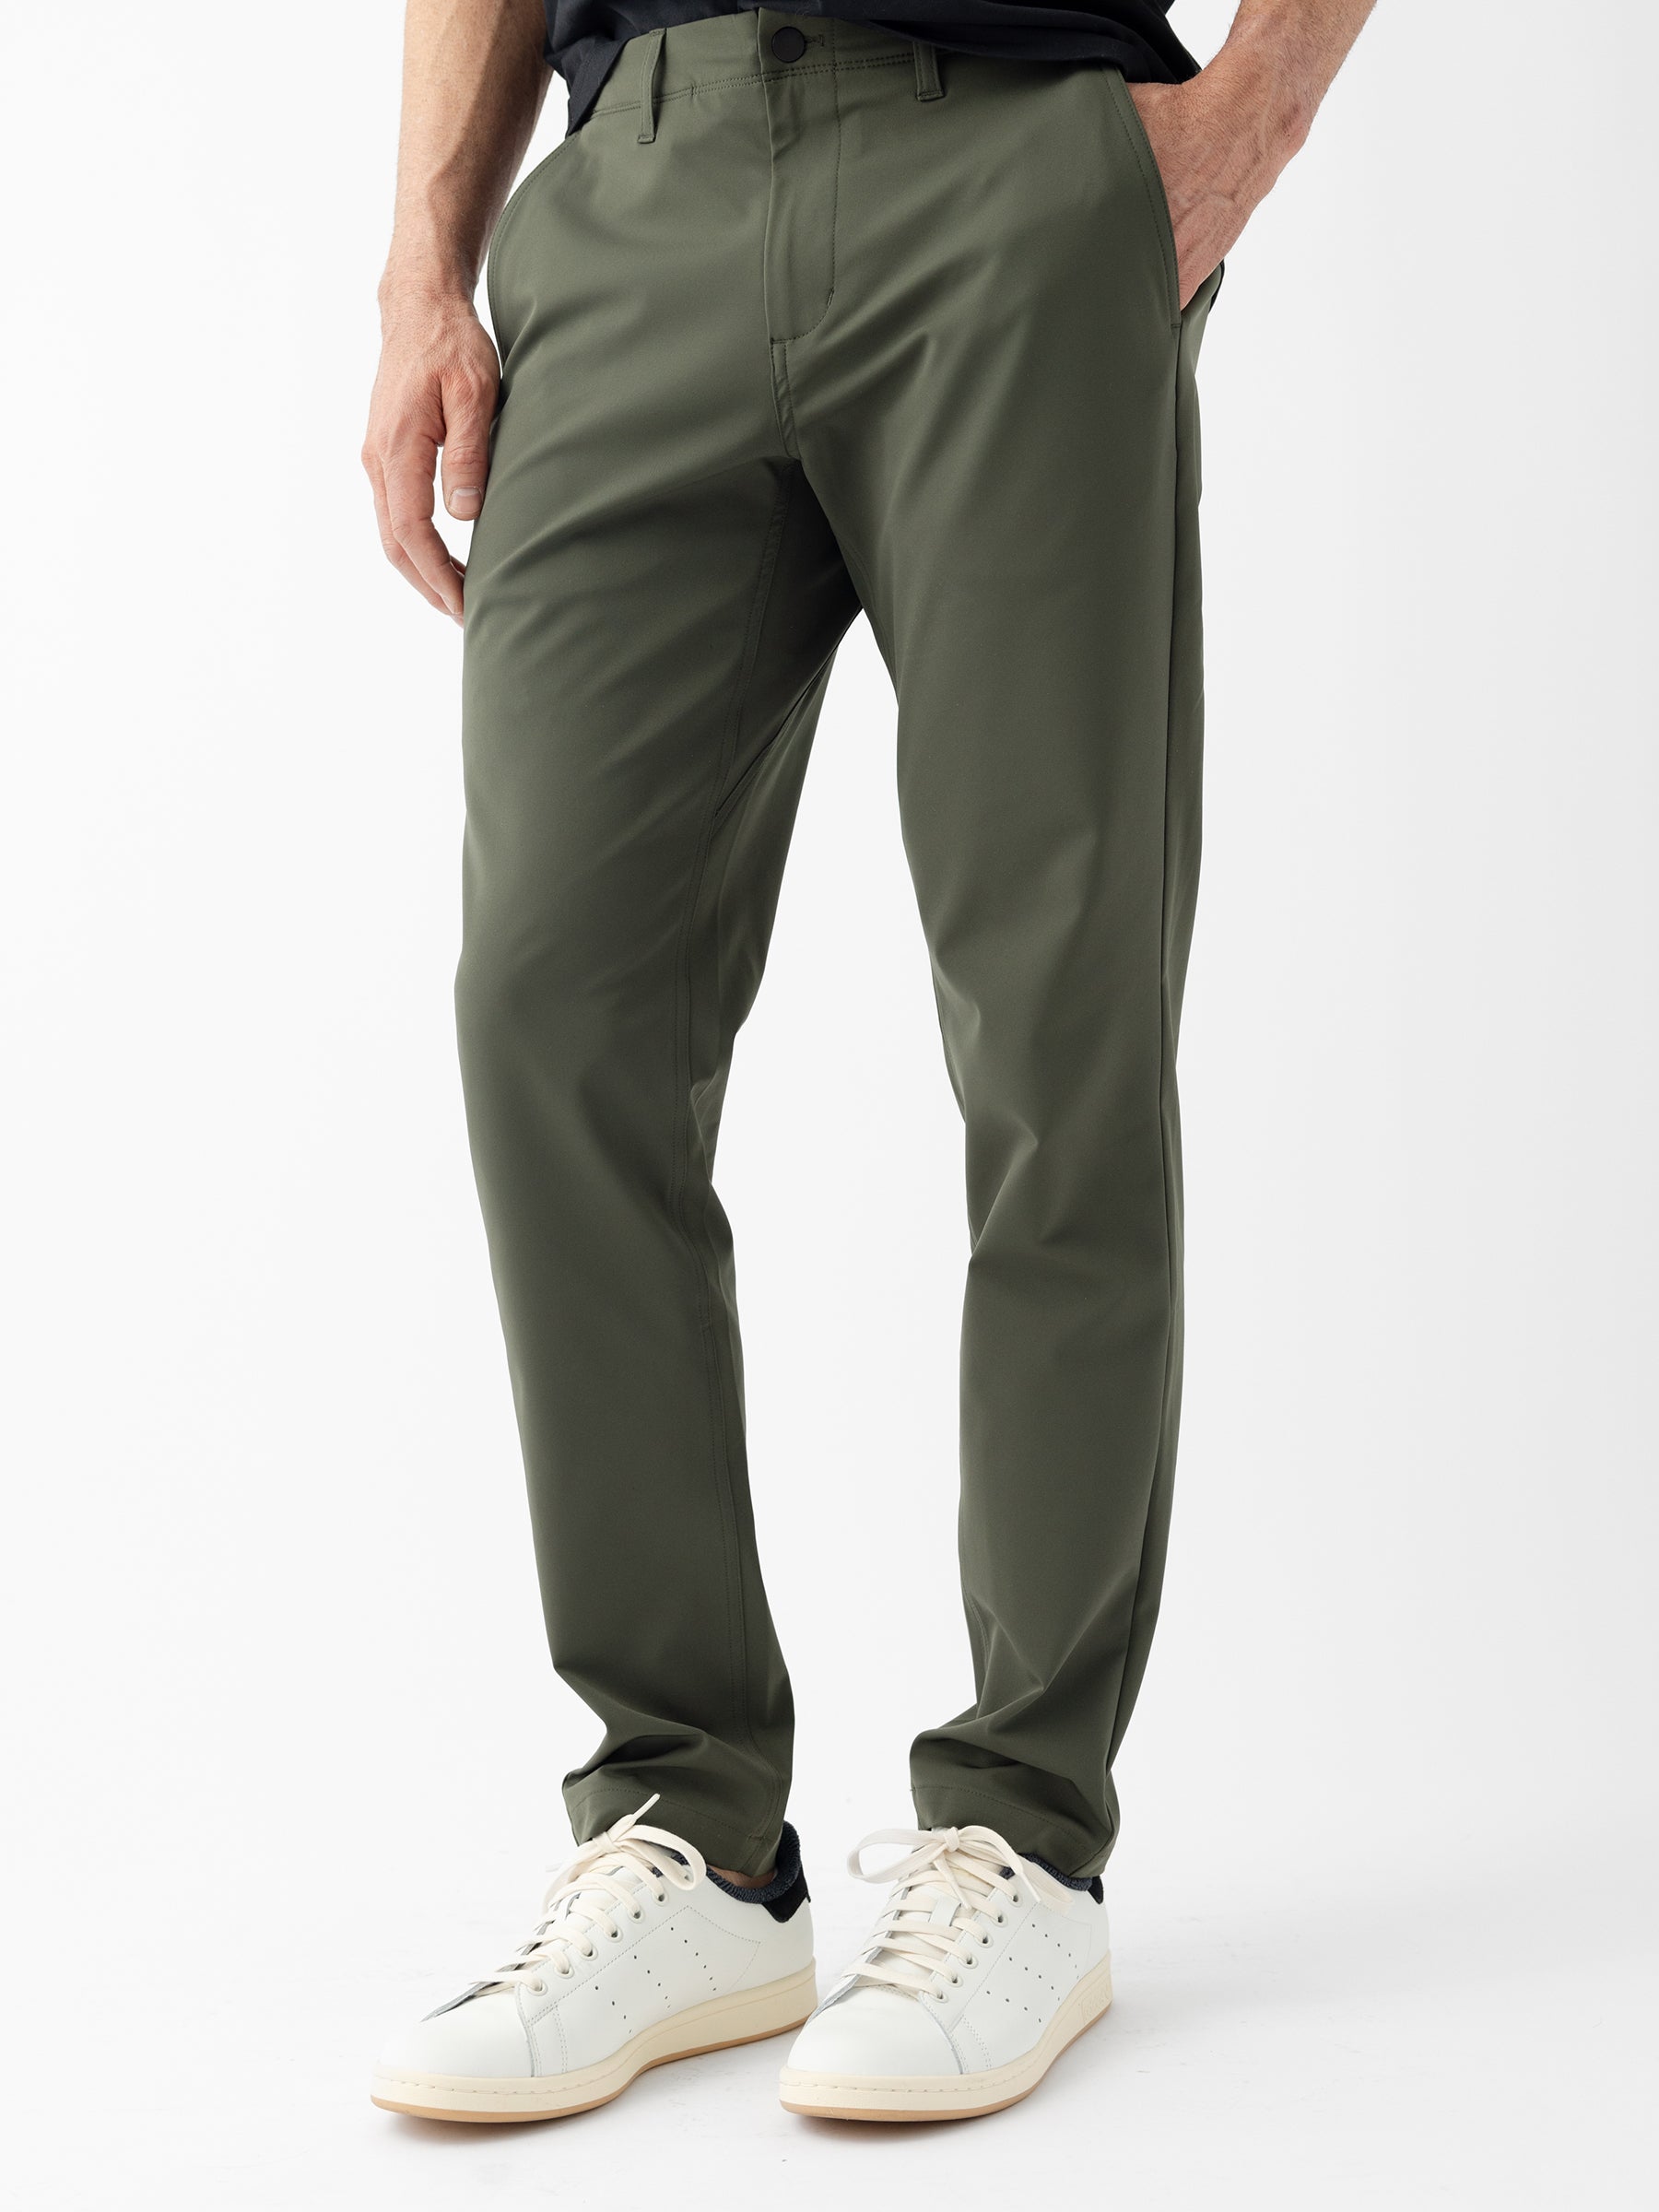 A person is shown wearing the Men's Everywhere Pant 32L from Cozy Earth in green along with white sneakers featuring black details. The background is plain white, and only the lower half of the body is visible. The individual's left hand rests by their side. |Color:Olive